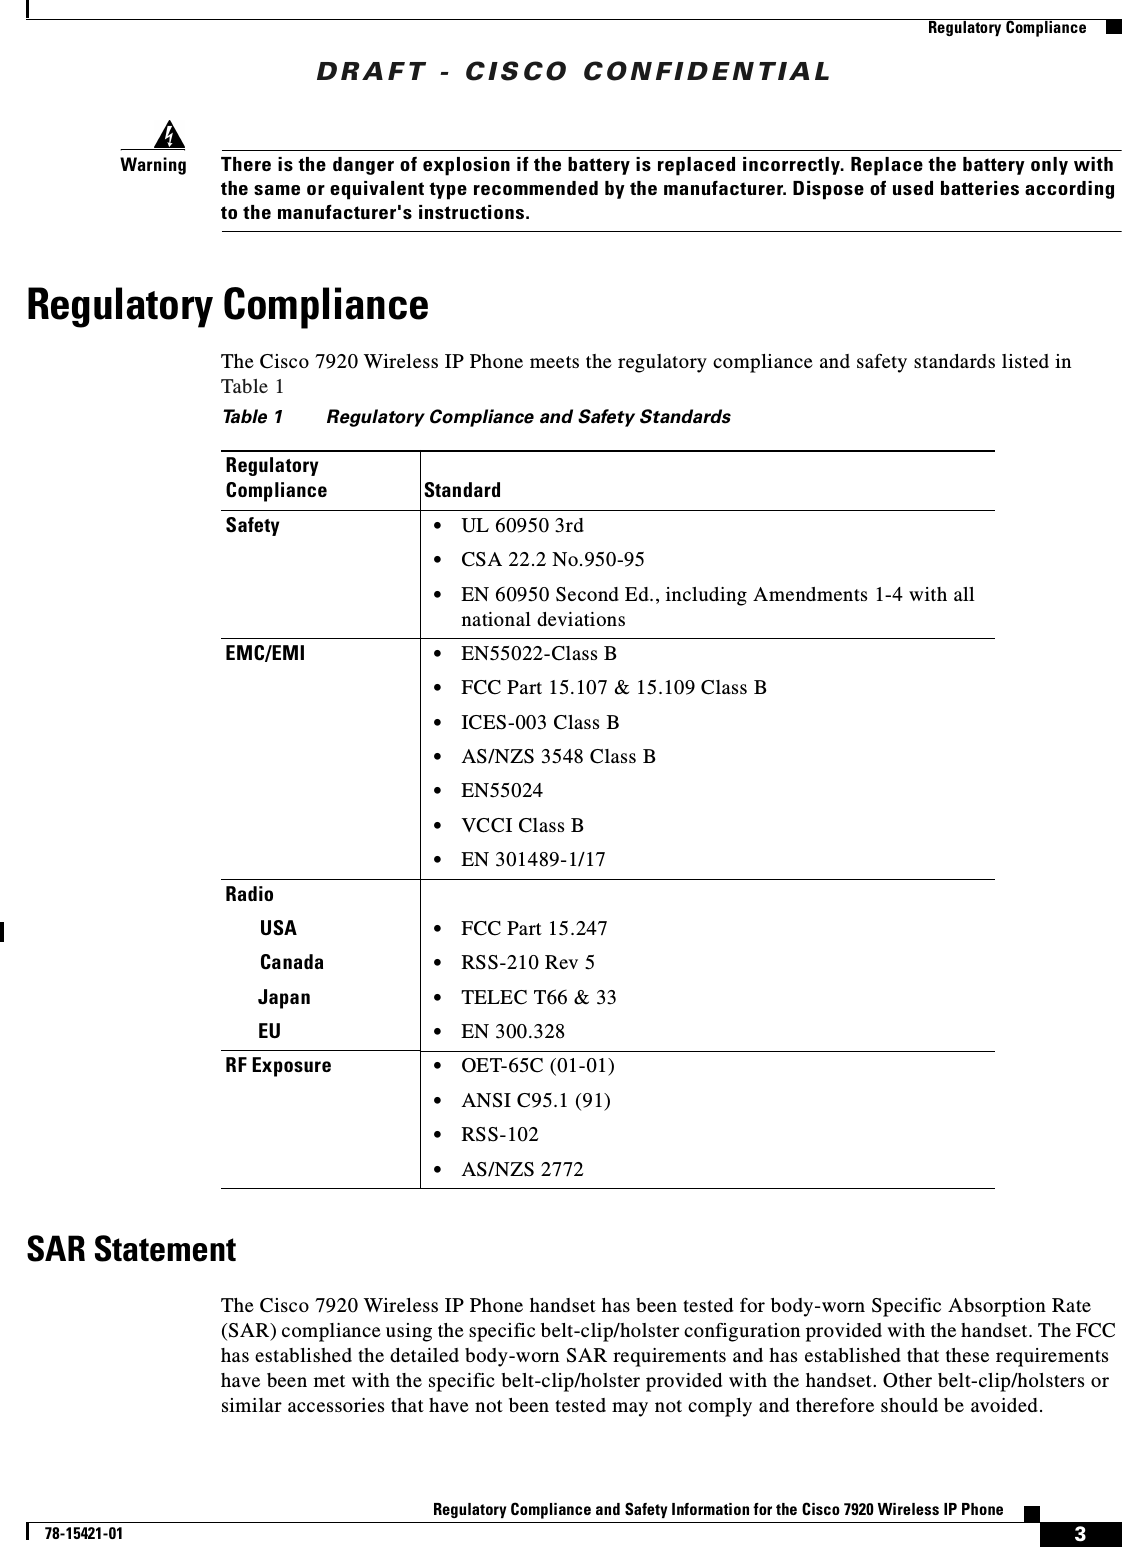 DRAFT - CISCO CONFIDENTIAL3Regulatory Compliance and Safety Information for the Cisco 7920 Wireless IP Phone78-15421-01Regulatory ComplianceWarningThere is the danger of explosion if the battery is replaced incorrectly. Replace the battery only with the same or equivalent type recommended by the manufacturer. Dispose of used batteries according to the manufacturer&apos;s instructions.Regulatory ComplianceThe Cisco 7920 Wireless IP Phone meets the regulatory compliance and safety standards listed in Table 1 SAR StatementThe Cisco 7920 Wireless IP Phone handset has been tested for body-worn Specific Absorption Rate (SAR) compliance using the specific belt-clip/holster configuration provided with the handset. The FCC has established the detailed body-worn SAR requirements and has established that these requirements have been met with the specific belt-clip/holster provided with the handset. Other belt-clip/holsters or similar accessories that have not been tested may not comply and therefore should be avoided.Table 1 Regulatory Compliance and Safety StandardsRegulatory Compliance StandardSafety •UL 60950 3rd•CSA 22.2 No.950-95•EN 60950 Second Ed., including Amendments 1-4 with all national deviationsEMC/EMI •EN55022-Class B•FCC Part 15.107 &amp; 15.109 Class B•ICES-003 Class B•AS/NZS 3548 Class B•EN55024•VCCI Class B•EN 301489-1/17RadioUSA •FCC Part 15.247Canada •RSS-210 Rev 5Japan •TELEC T66 &amp; 33EU •EN 300.328RF Exposure •OET-65C (01-01)•ANSI C95.1 (91)•RSS-102•AS/NZS 2772